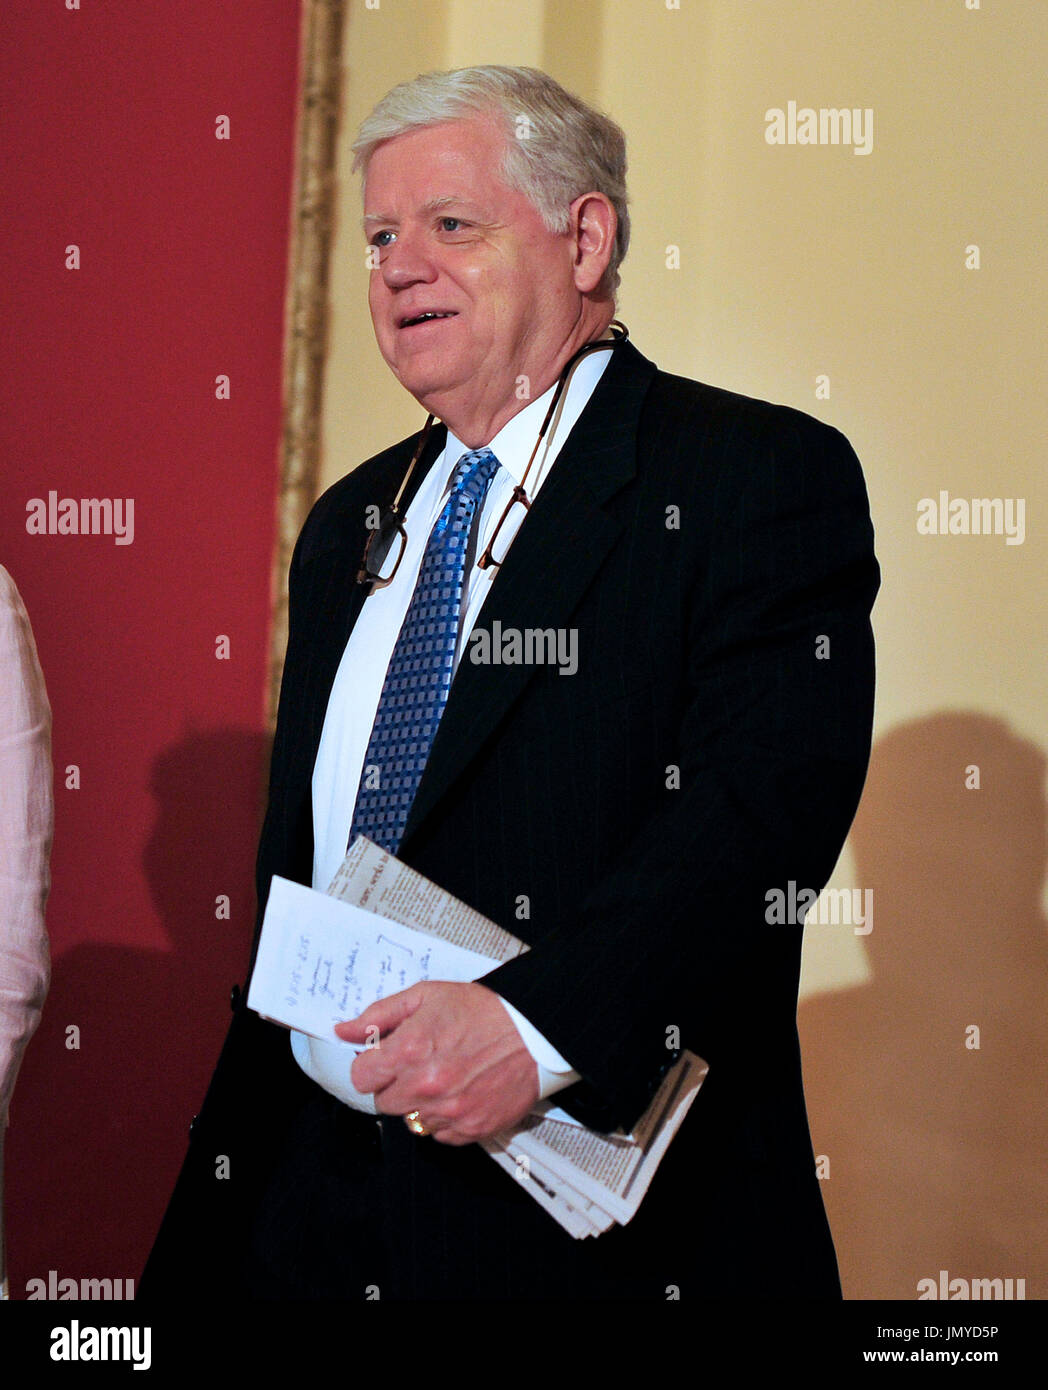 United States Representative John Larson (Democrat of Connecticut), Chairman, U.S. House Democratic Caucus walks through the Will Rogers Corridor towards the U.S. House Chamber for the historic vote on health care reform in the U.S. Capitol in Washington, D.C. on Sunday, March 21, 2010..Credit: Ron Sachs / CNP.(RESTRICTION: NO New York or New Jersey Newspapers or newspapers within a 75 mile radius of New York City) Stock Photo